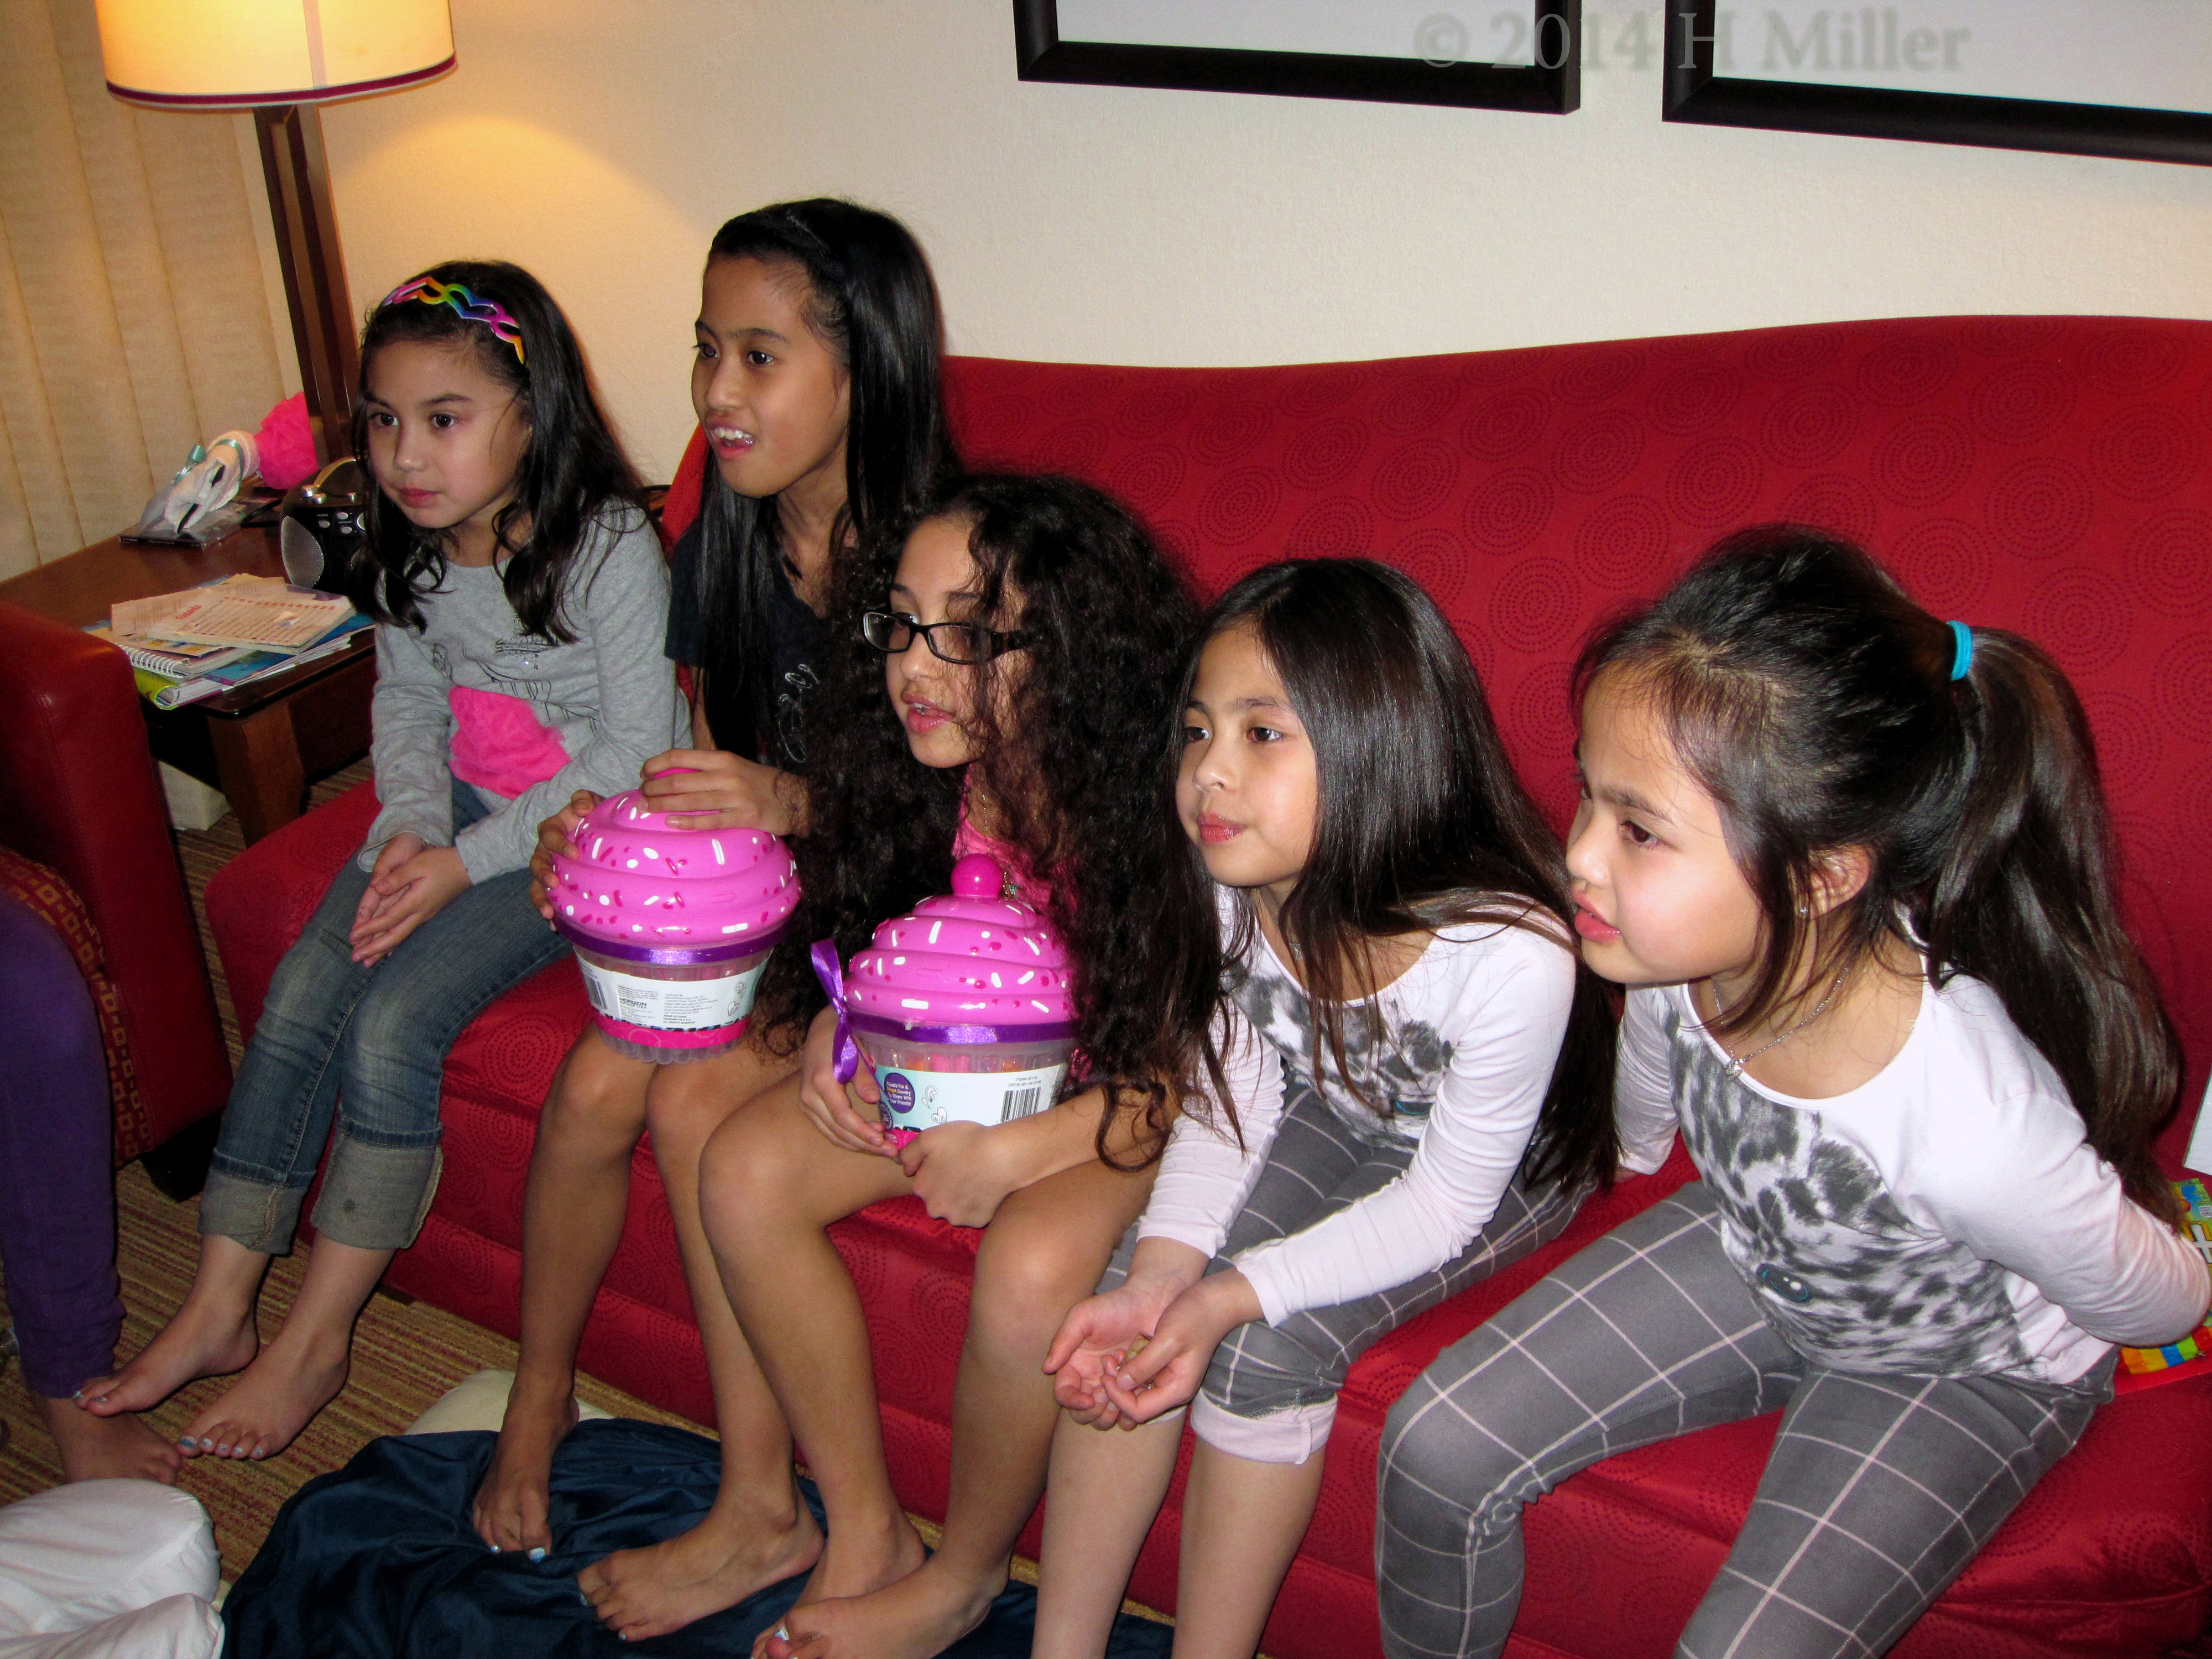 Another Pic Of The Girls Receiving Their Party Favors 